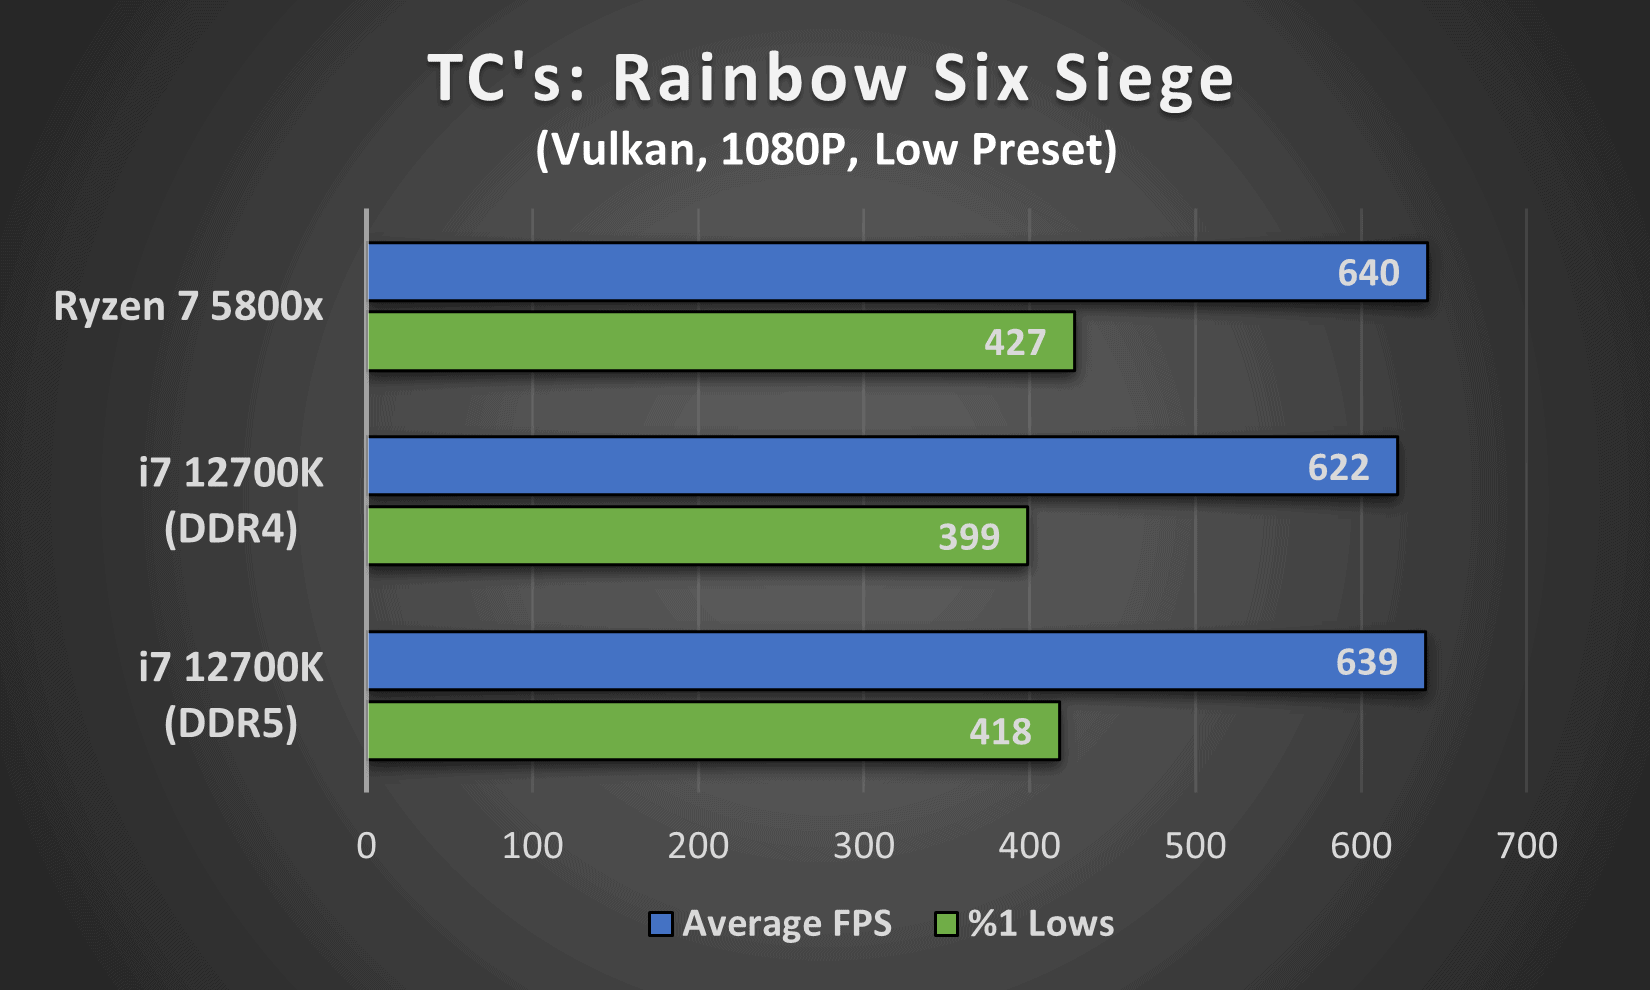 Tom Clancy's: Rainbow Six Siege performance comparison between Intel's i7 12700K (DDR4 and DDR5) and AMD's Ryzen 7 5800x